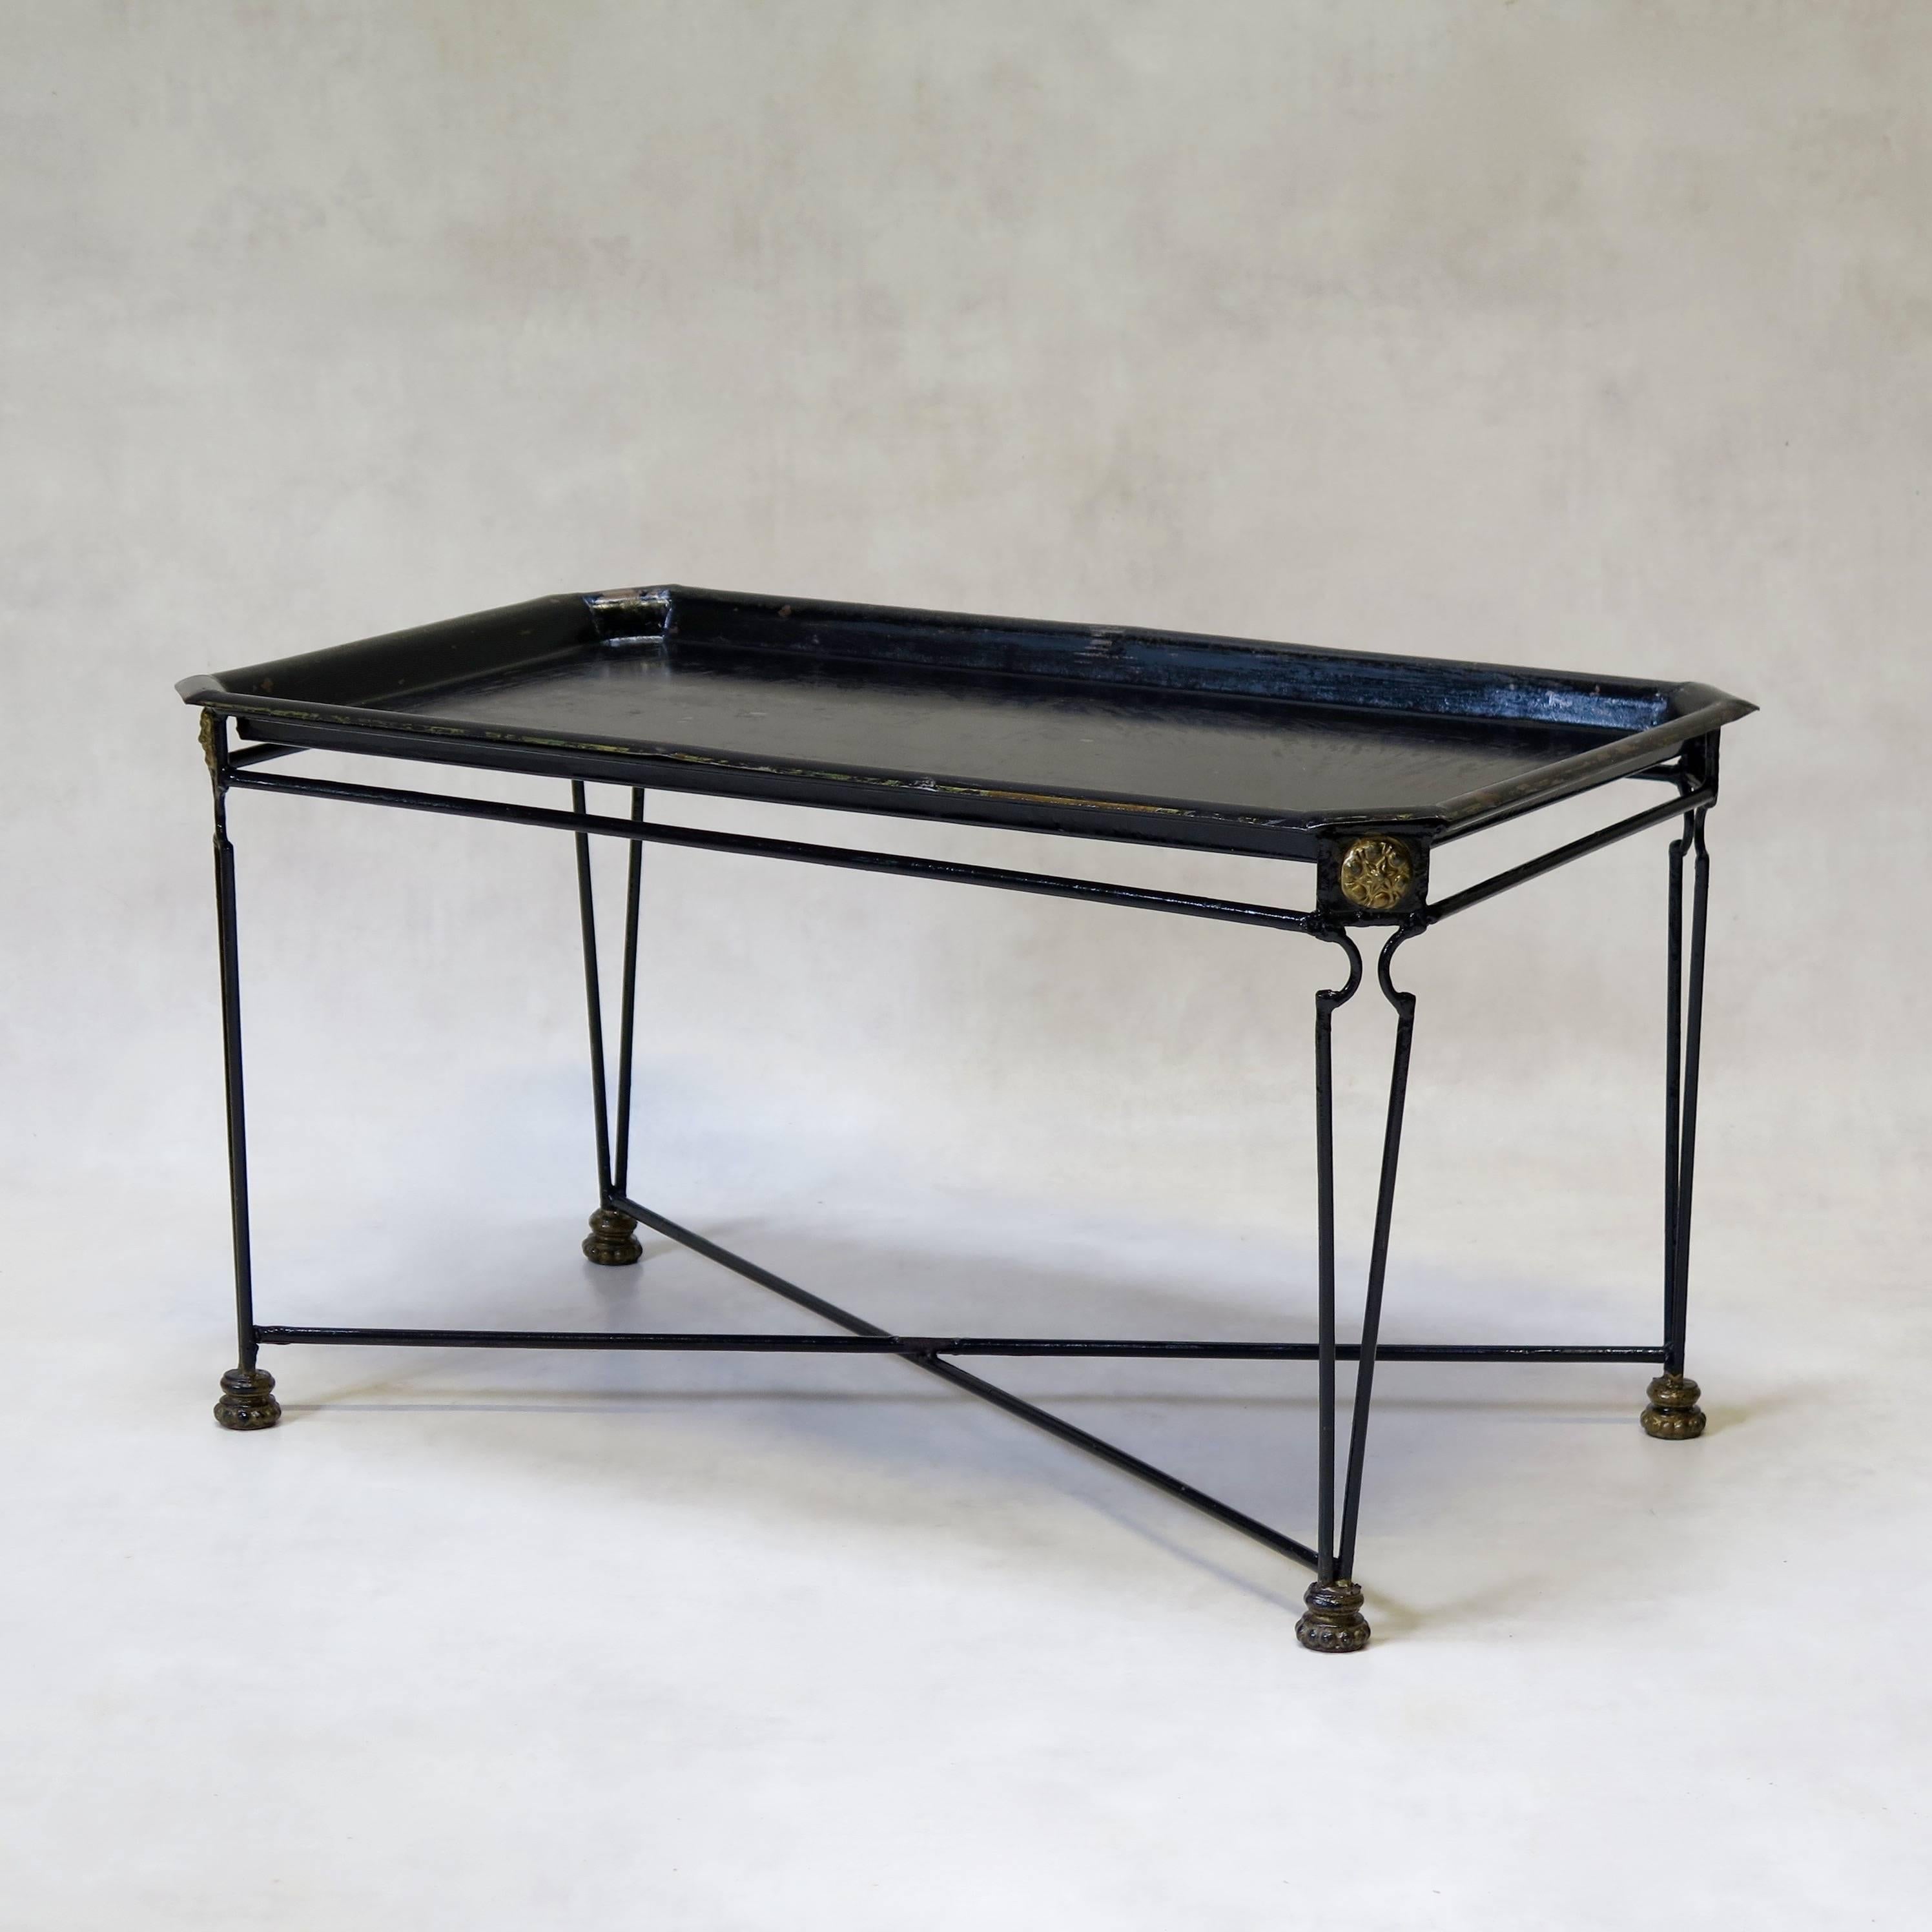 20th Century Four Black Painted Metal Tray Tables in the 1940s Style, France, circa 1960s For Sale